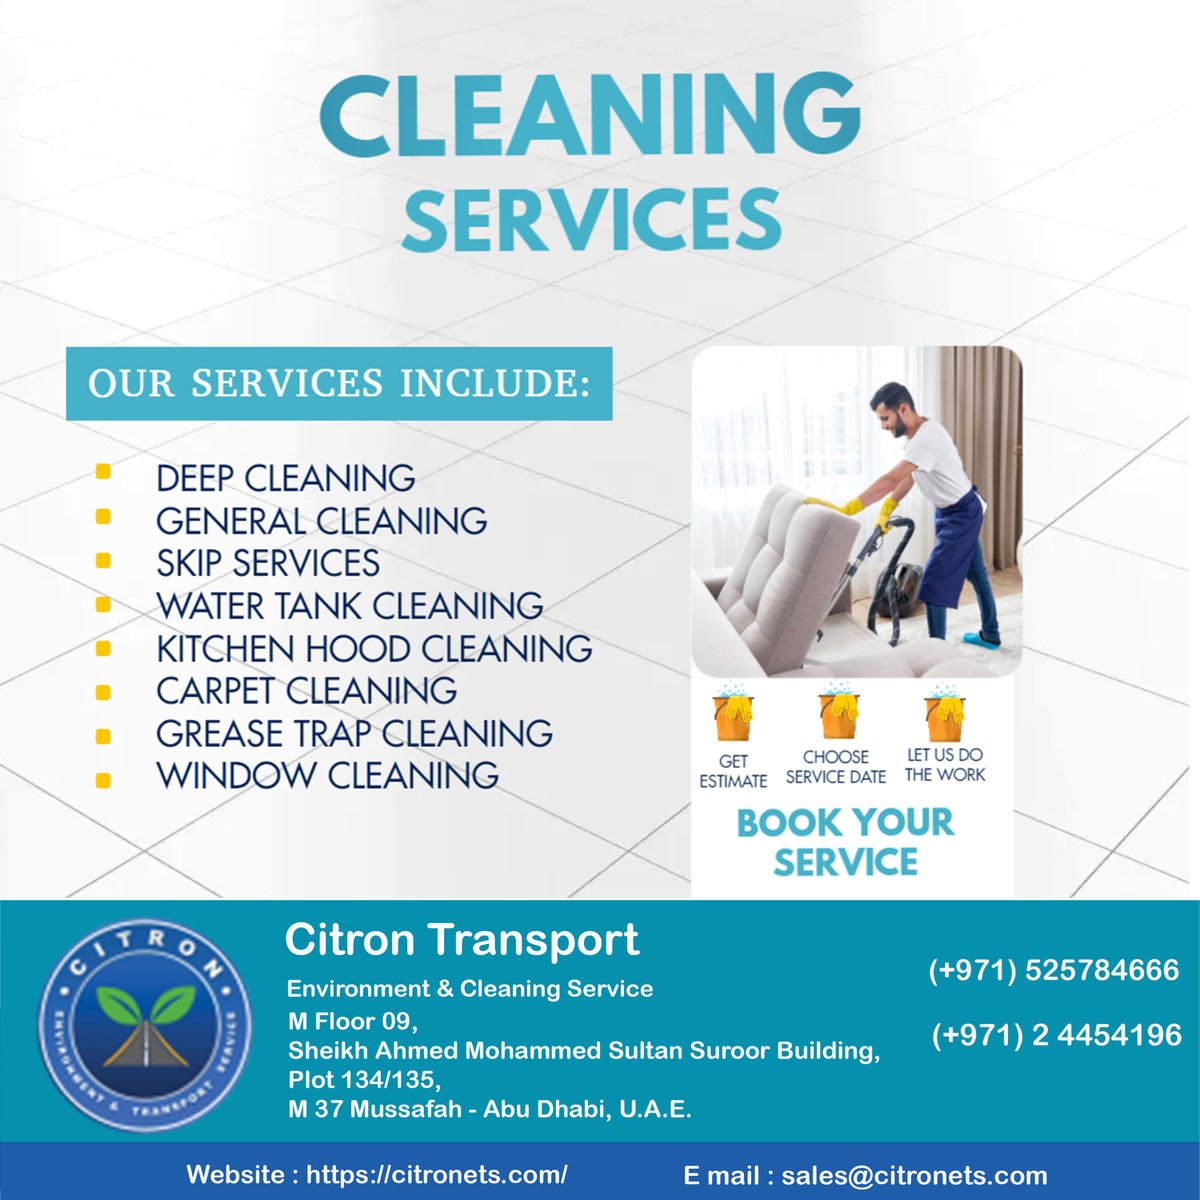 We are one of the prominent cleaning services providers in Abu Dhabi.
✅citronets.com
✅(+971) 525784666
✅sales@citronets.com
#citron #cleaninghacks #cleaningservice #officecleaning #greaseremoval #watertankcleaningservice #skipservice #generalcleaning  #cleaning